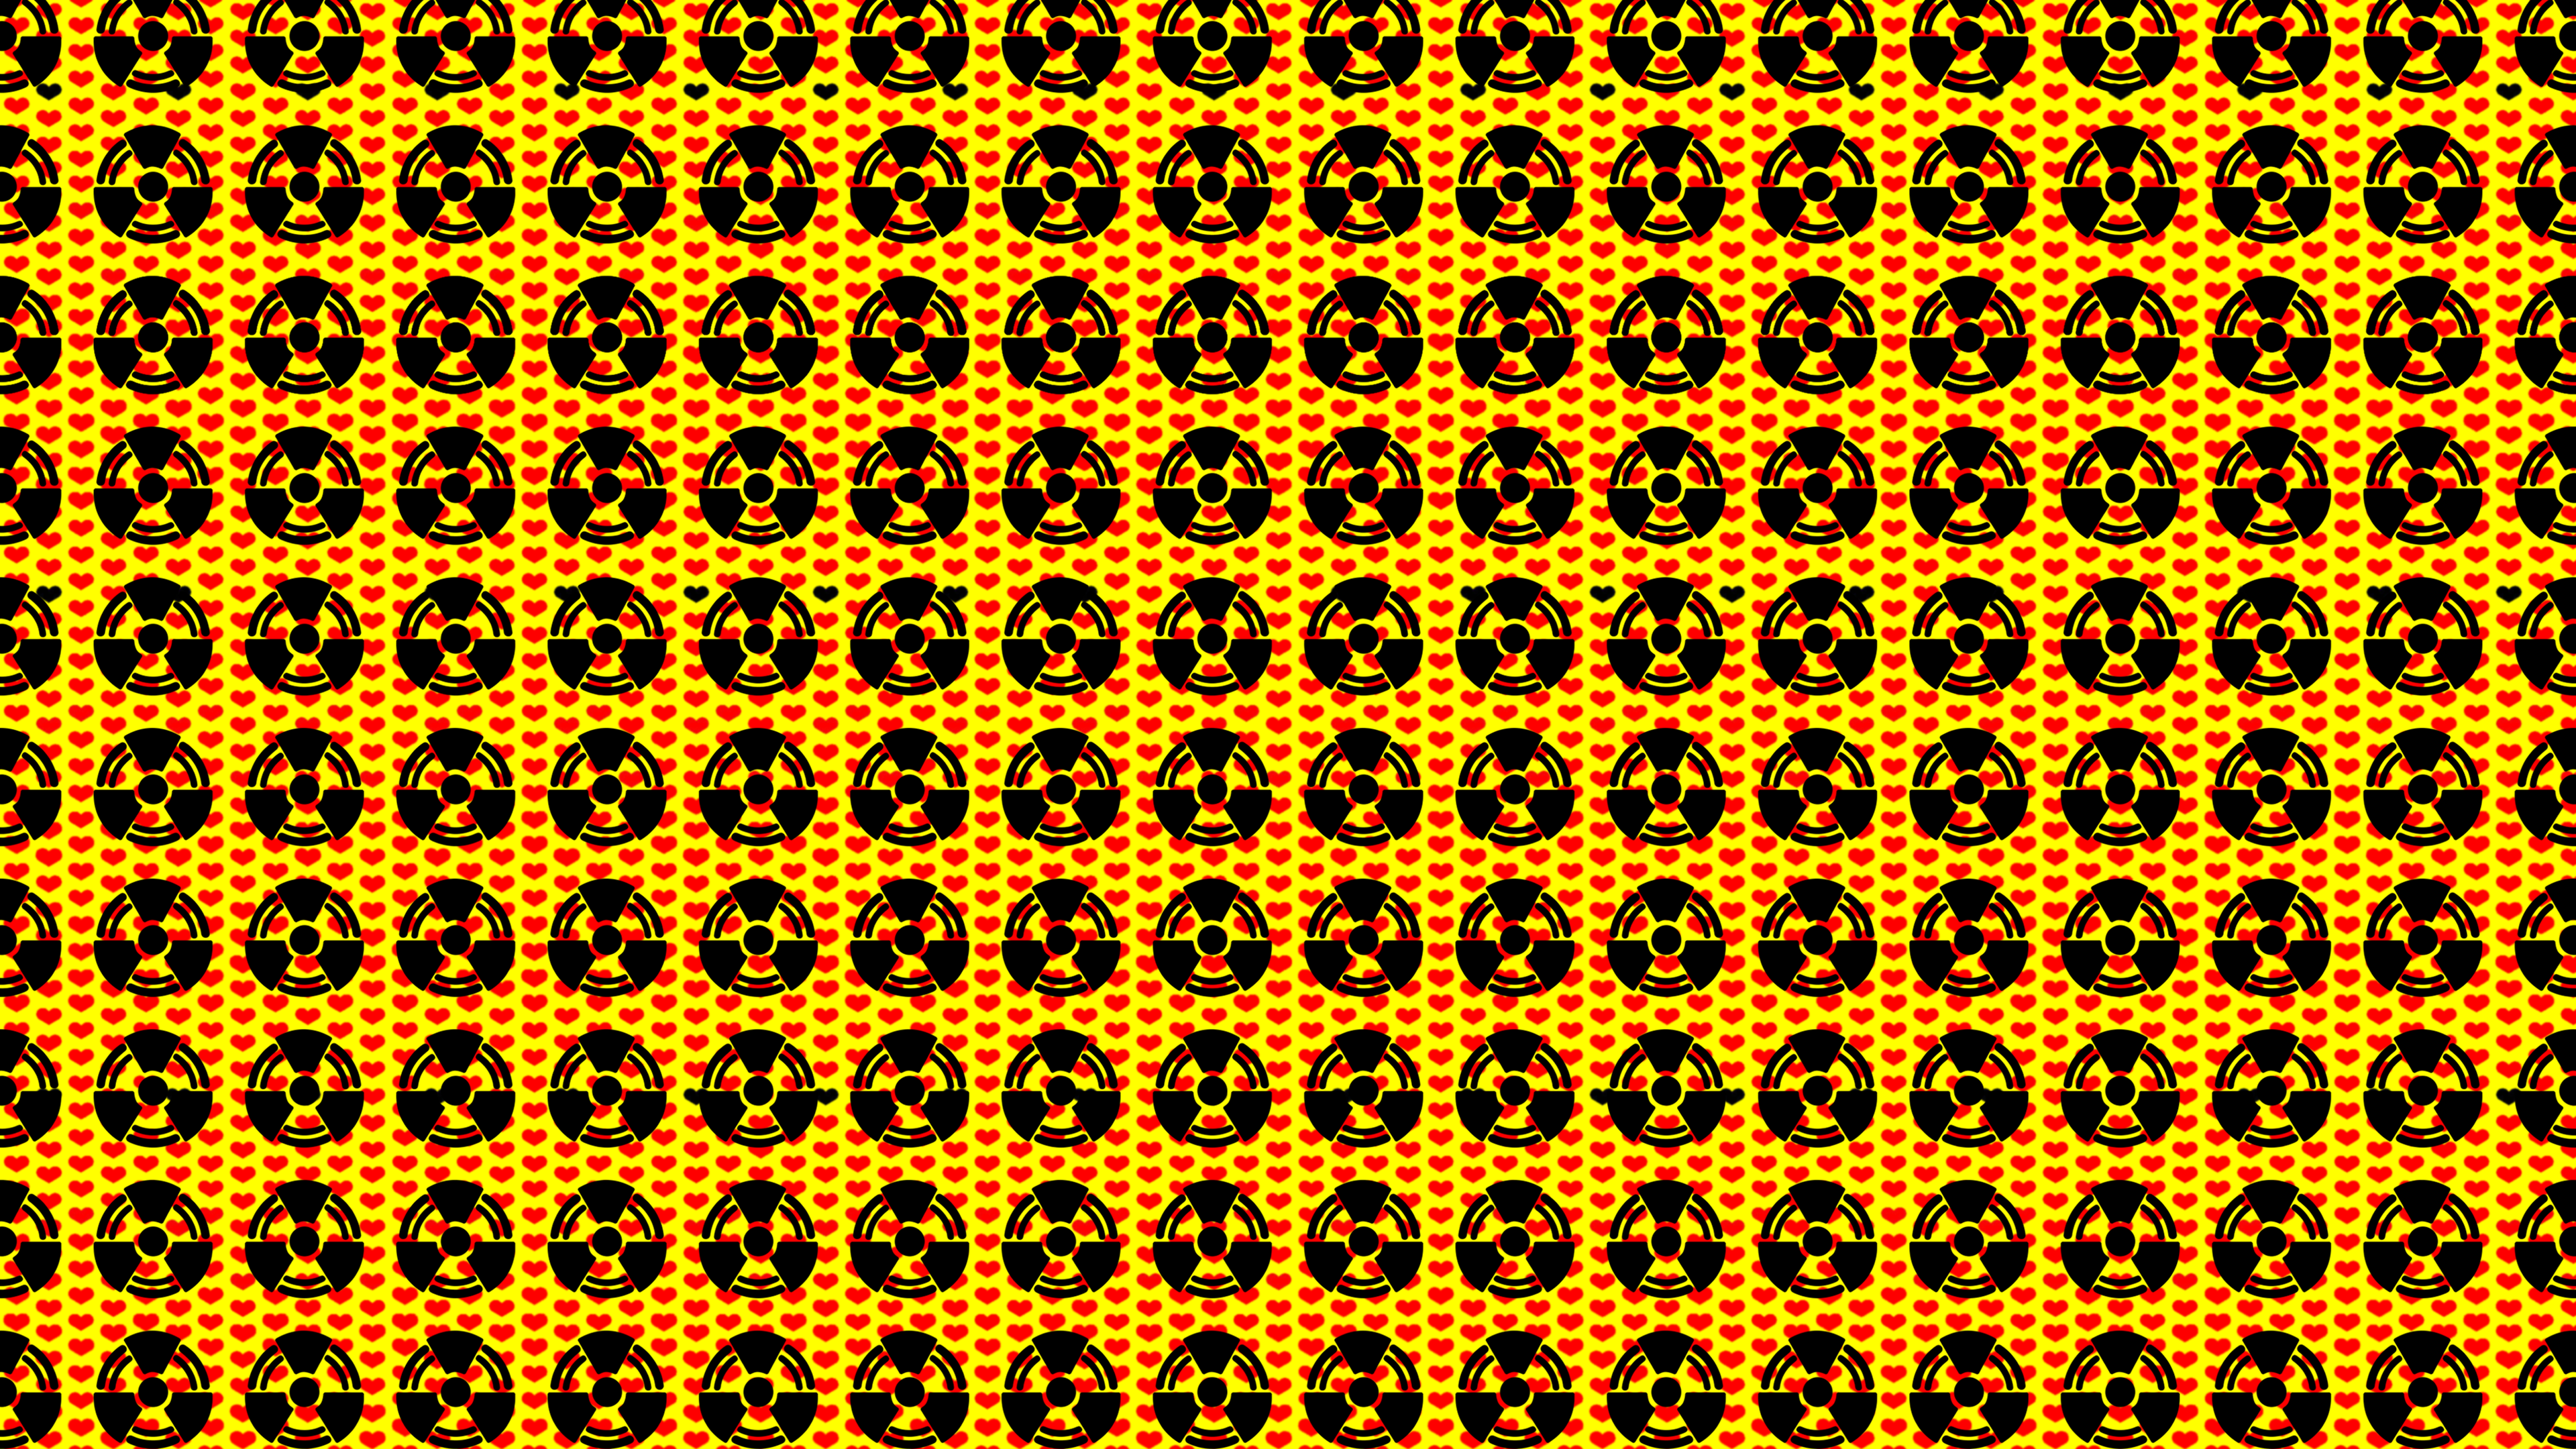 General 3840x2160 hide (musician) radioactive nuclear yellow heart yellow background digital art